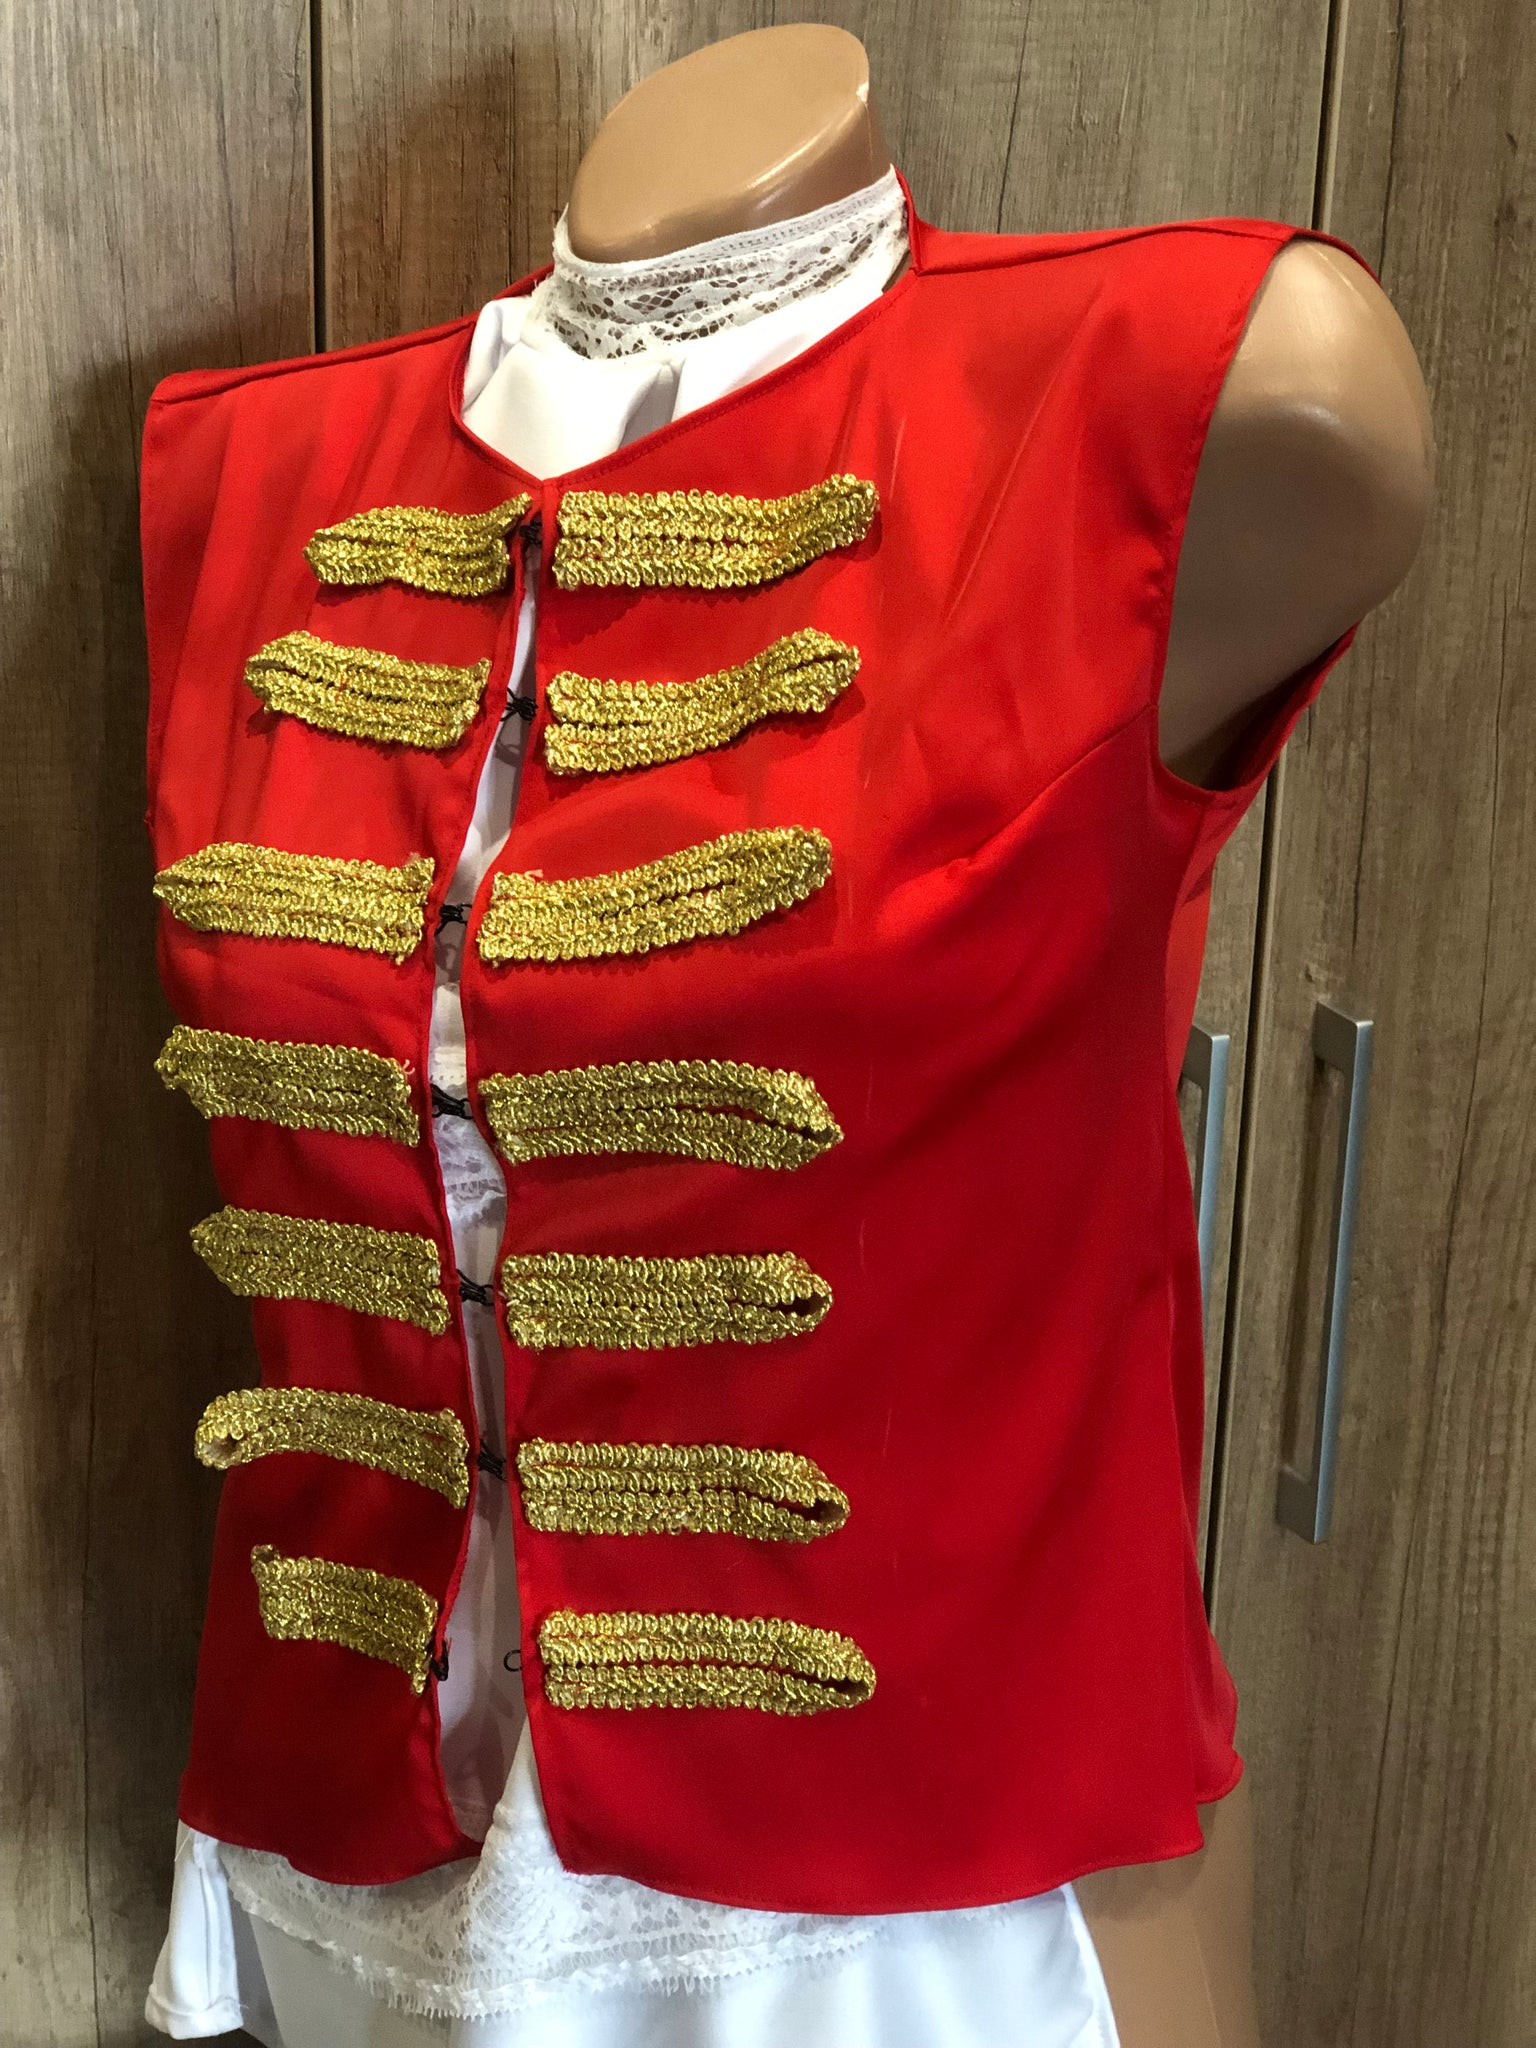 Ring Master Jacket Costume - Costume Creations By Robin